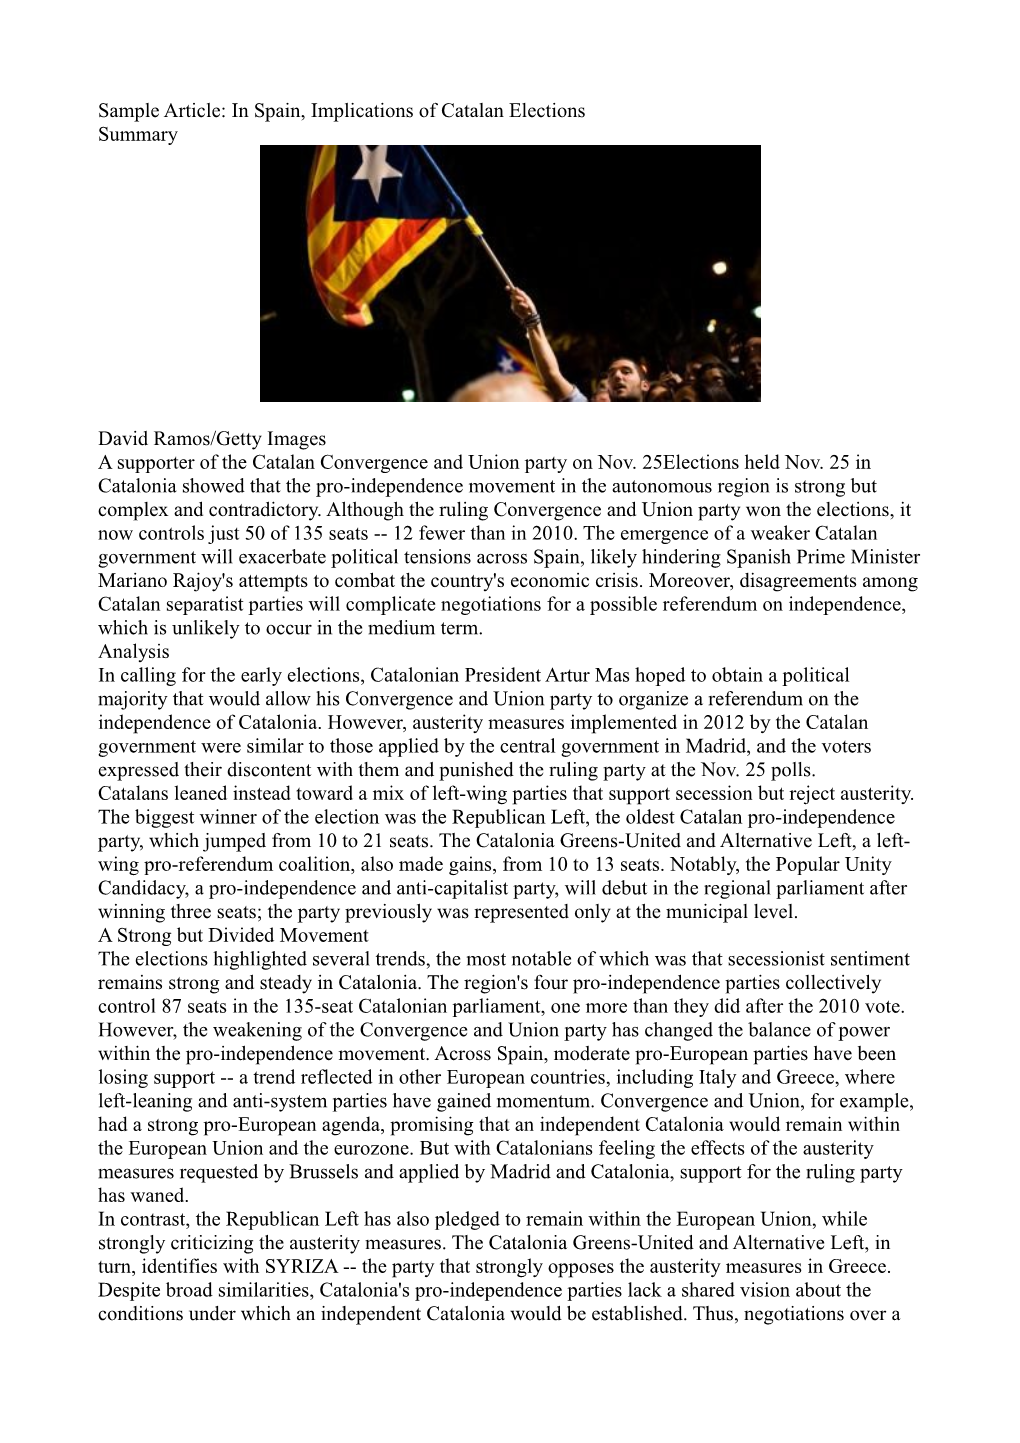 In Spain, Implications of Catalan Elections Summary David